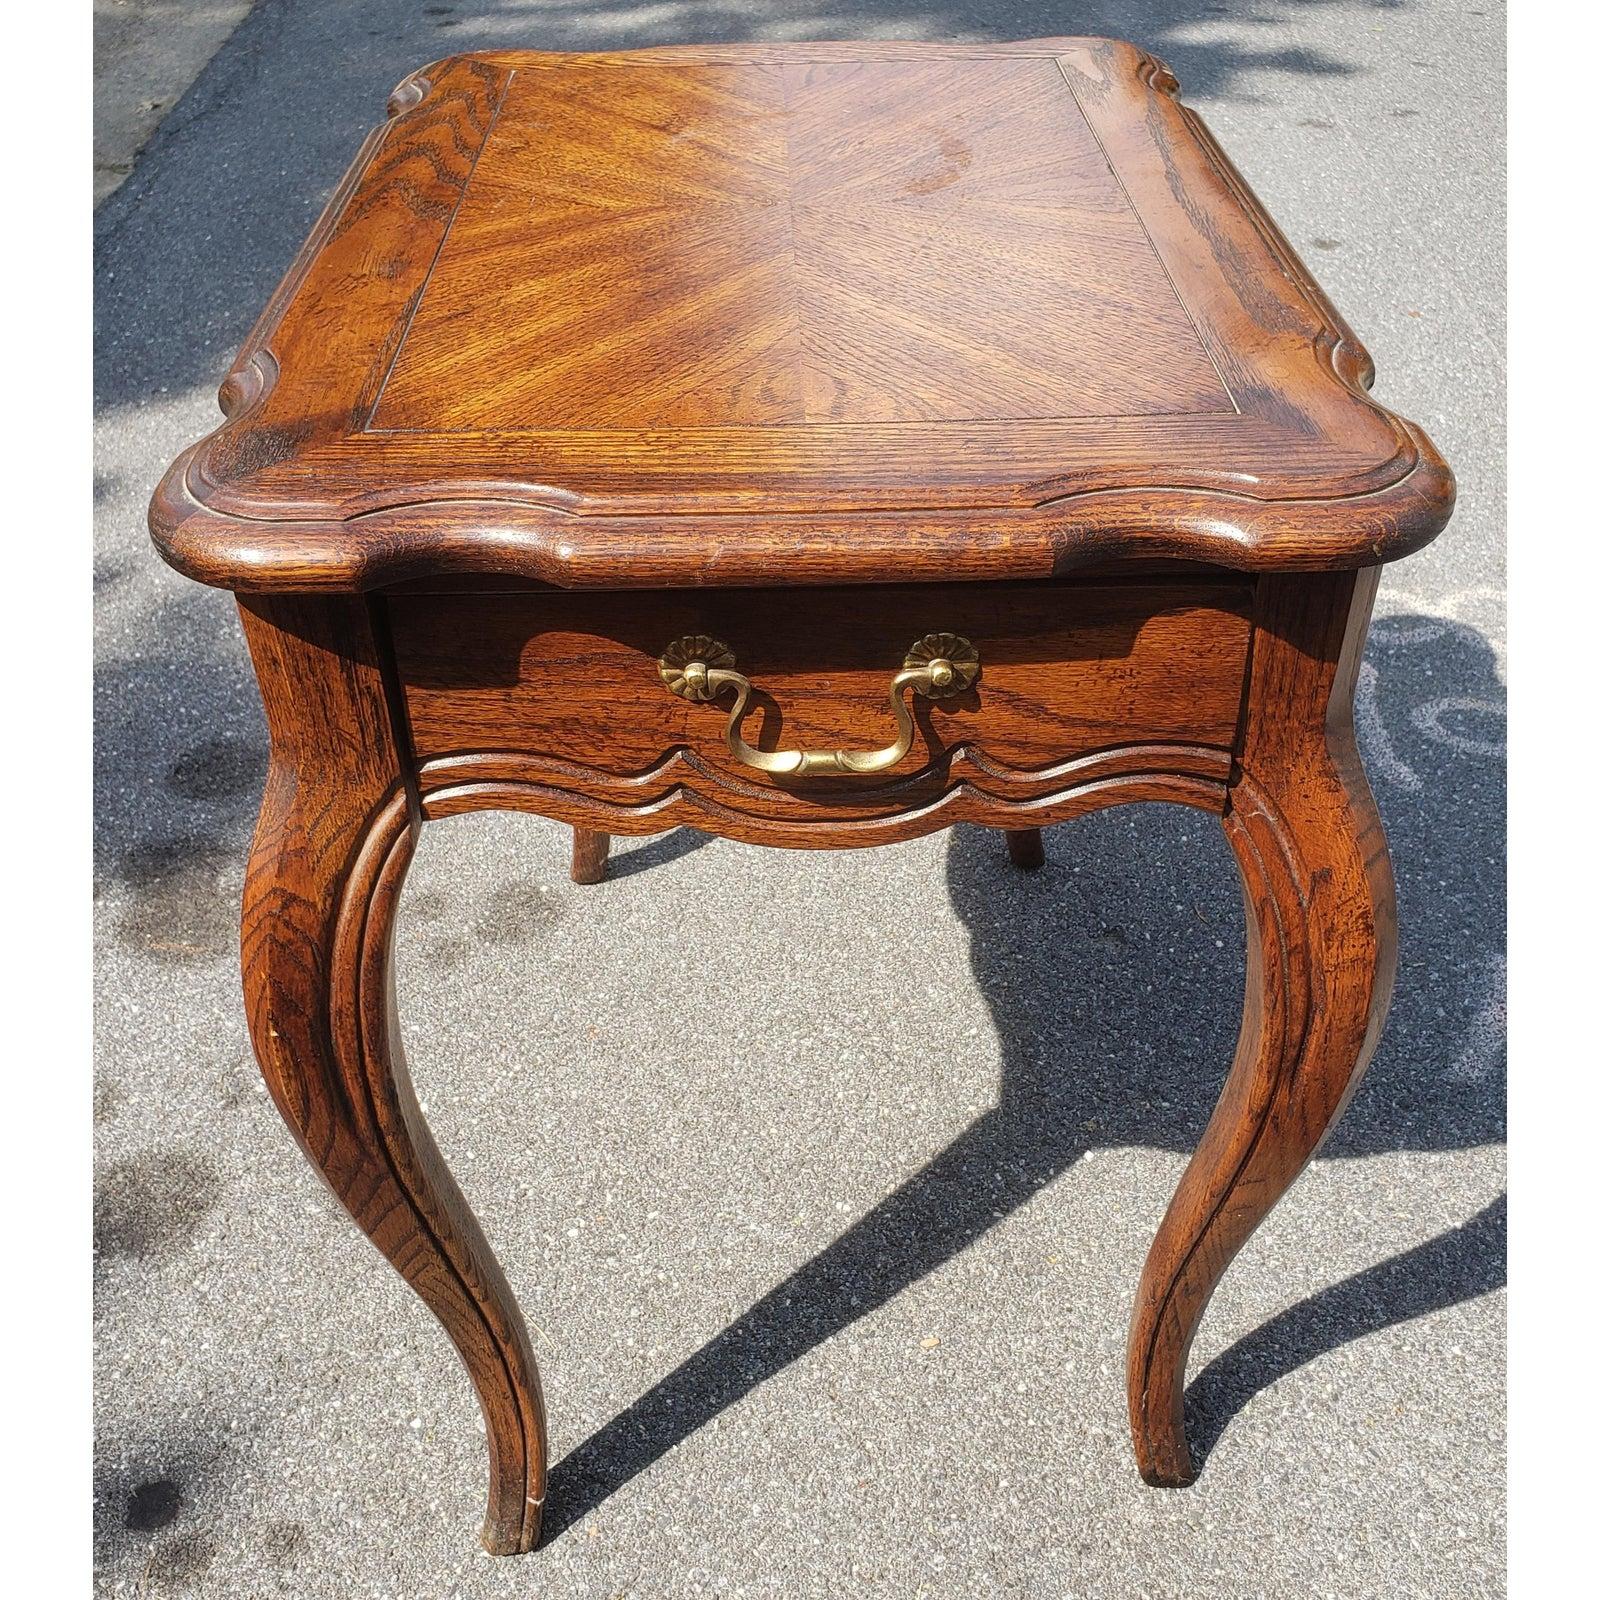 Hammary Furniture dark oak side table with banded top. On drawer with original hardware.
Table measures 18W x 25D x 24H. Table in excellent condition.
 